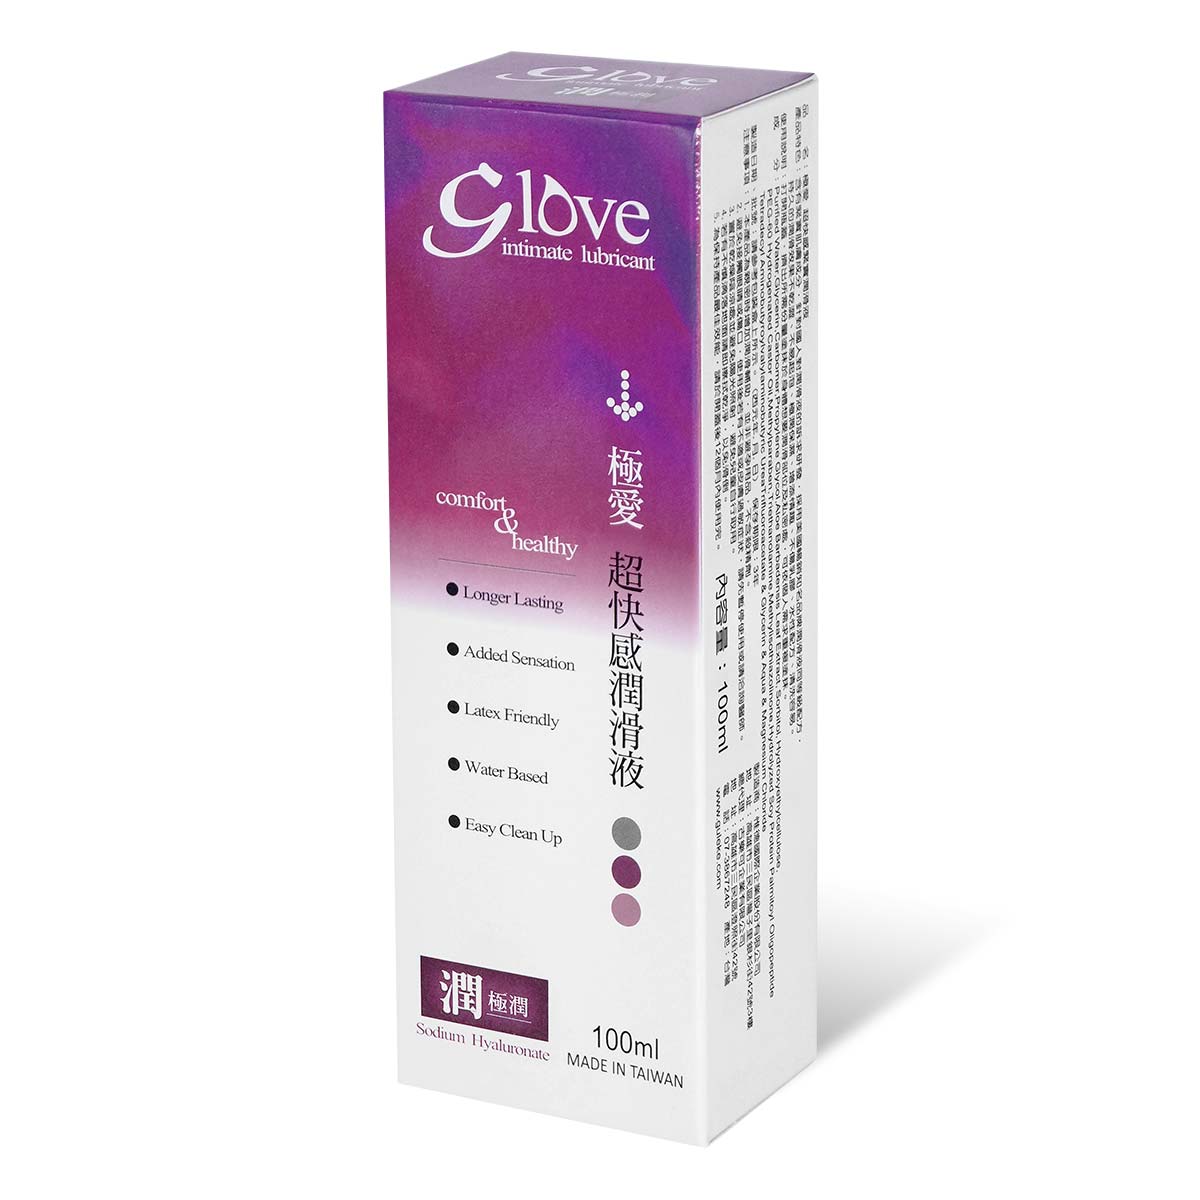 G Love intimate lubricant [Sodium Hyaluronate] 100ml Water-based Lubricant-thumb_1